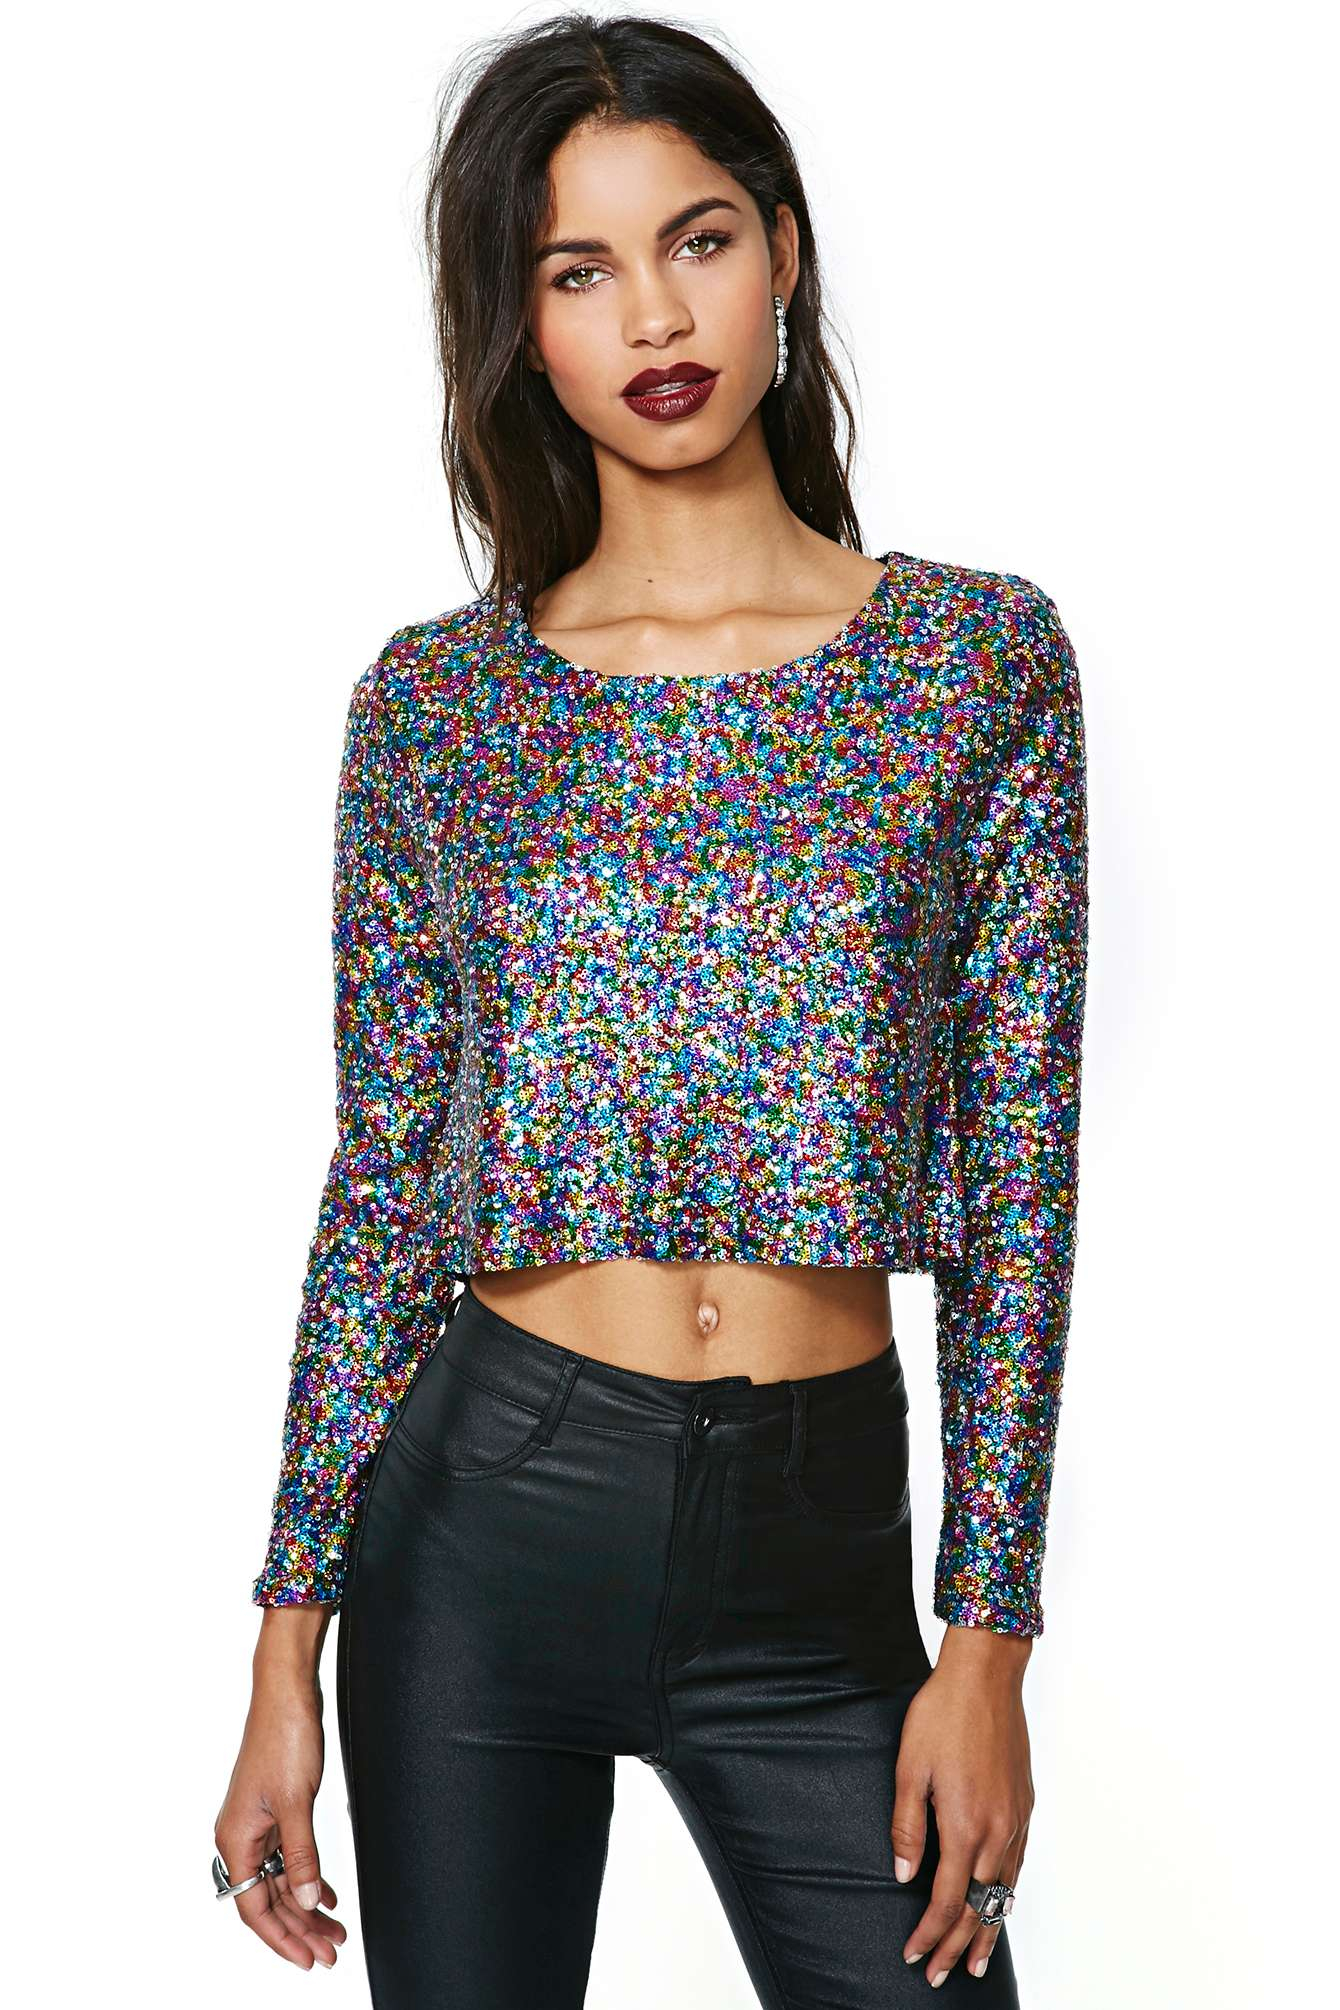 Nasty Gal Minkpink Glamour Glitter Top in Multicolor (MULTI) | Lyst